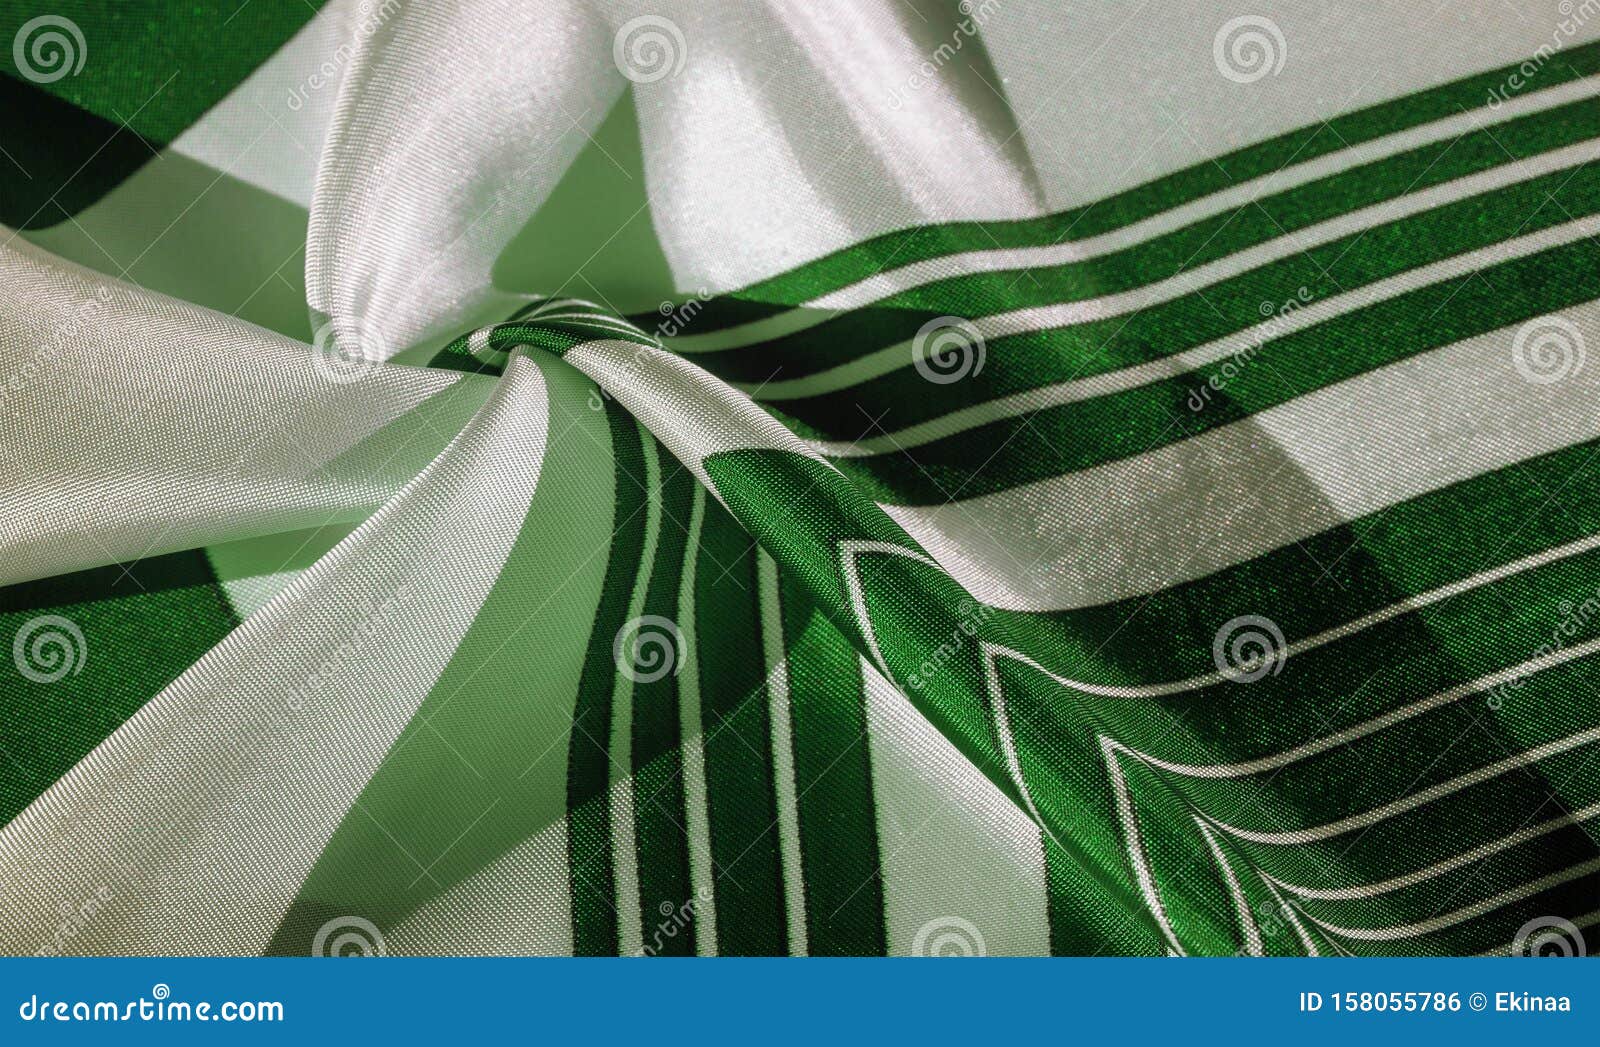 Texture, Silk Fabric with a Green Striped Pattern. the Design of this ...